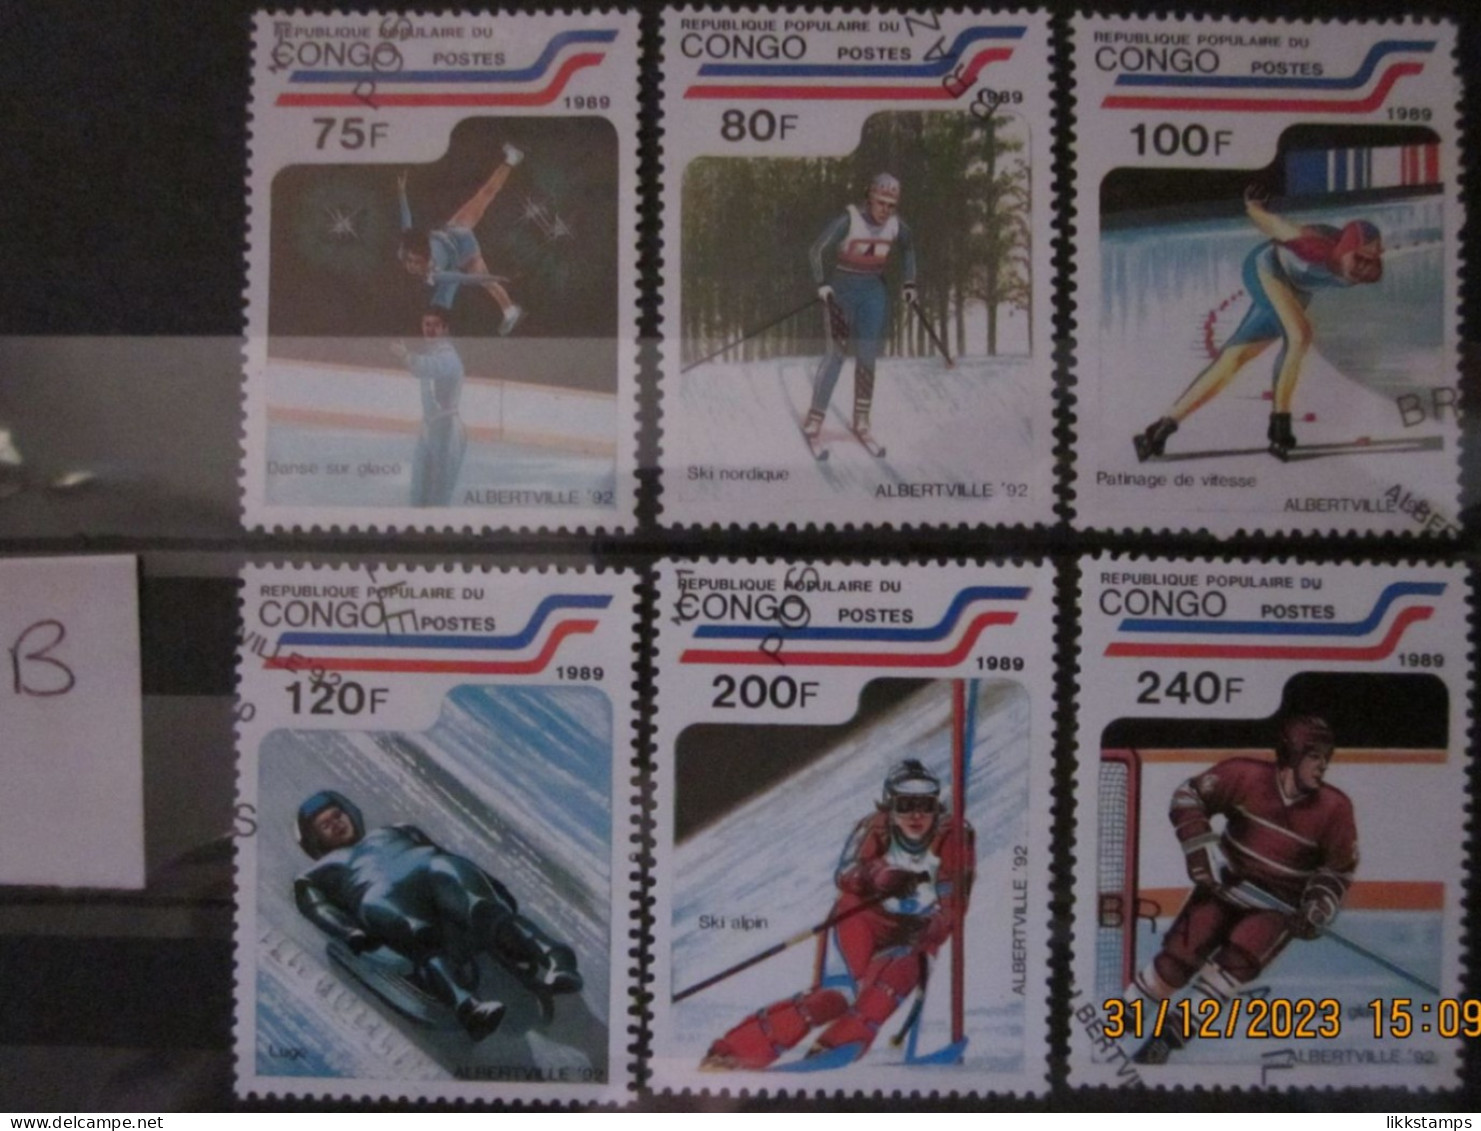 CONGO 1989 ~ S.G. 1160 - 1165, ~ ( LOT 'B' ) ~ OLYMPIC GAMES. ~  VFU #03077 - Used